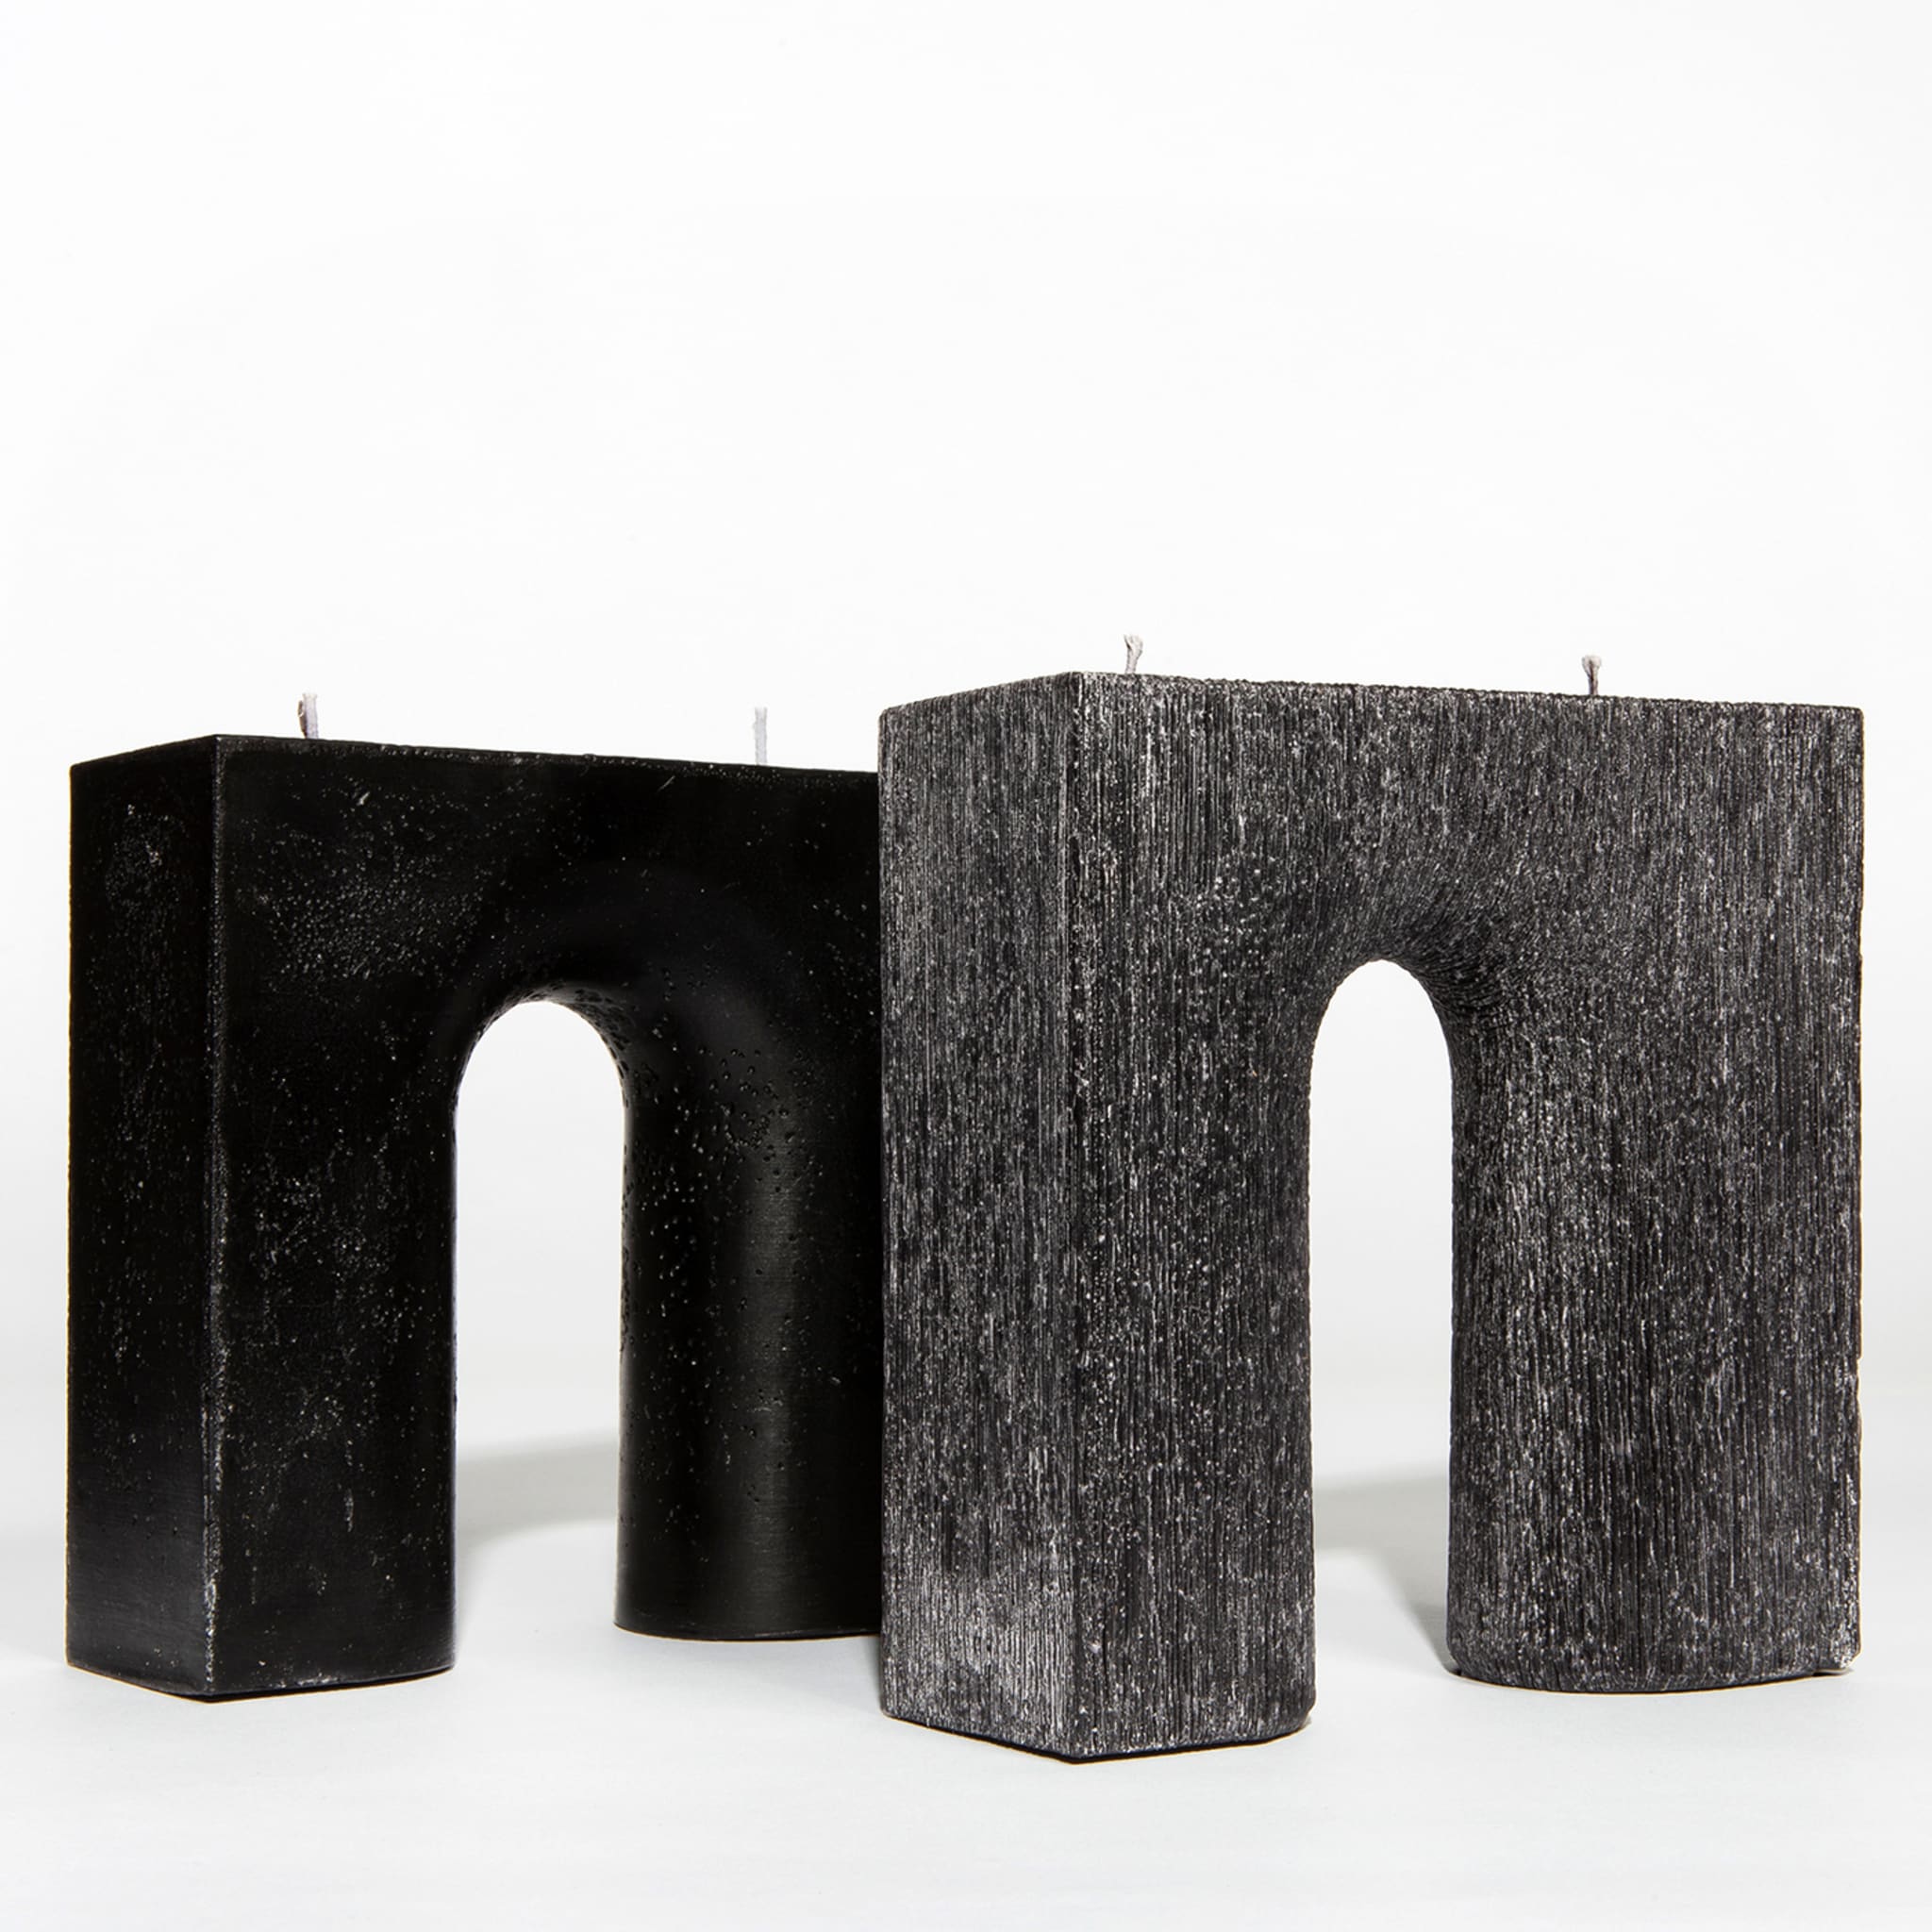 Trionfo Set of 2 Black Candles - Alternative view 3